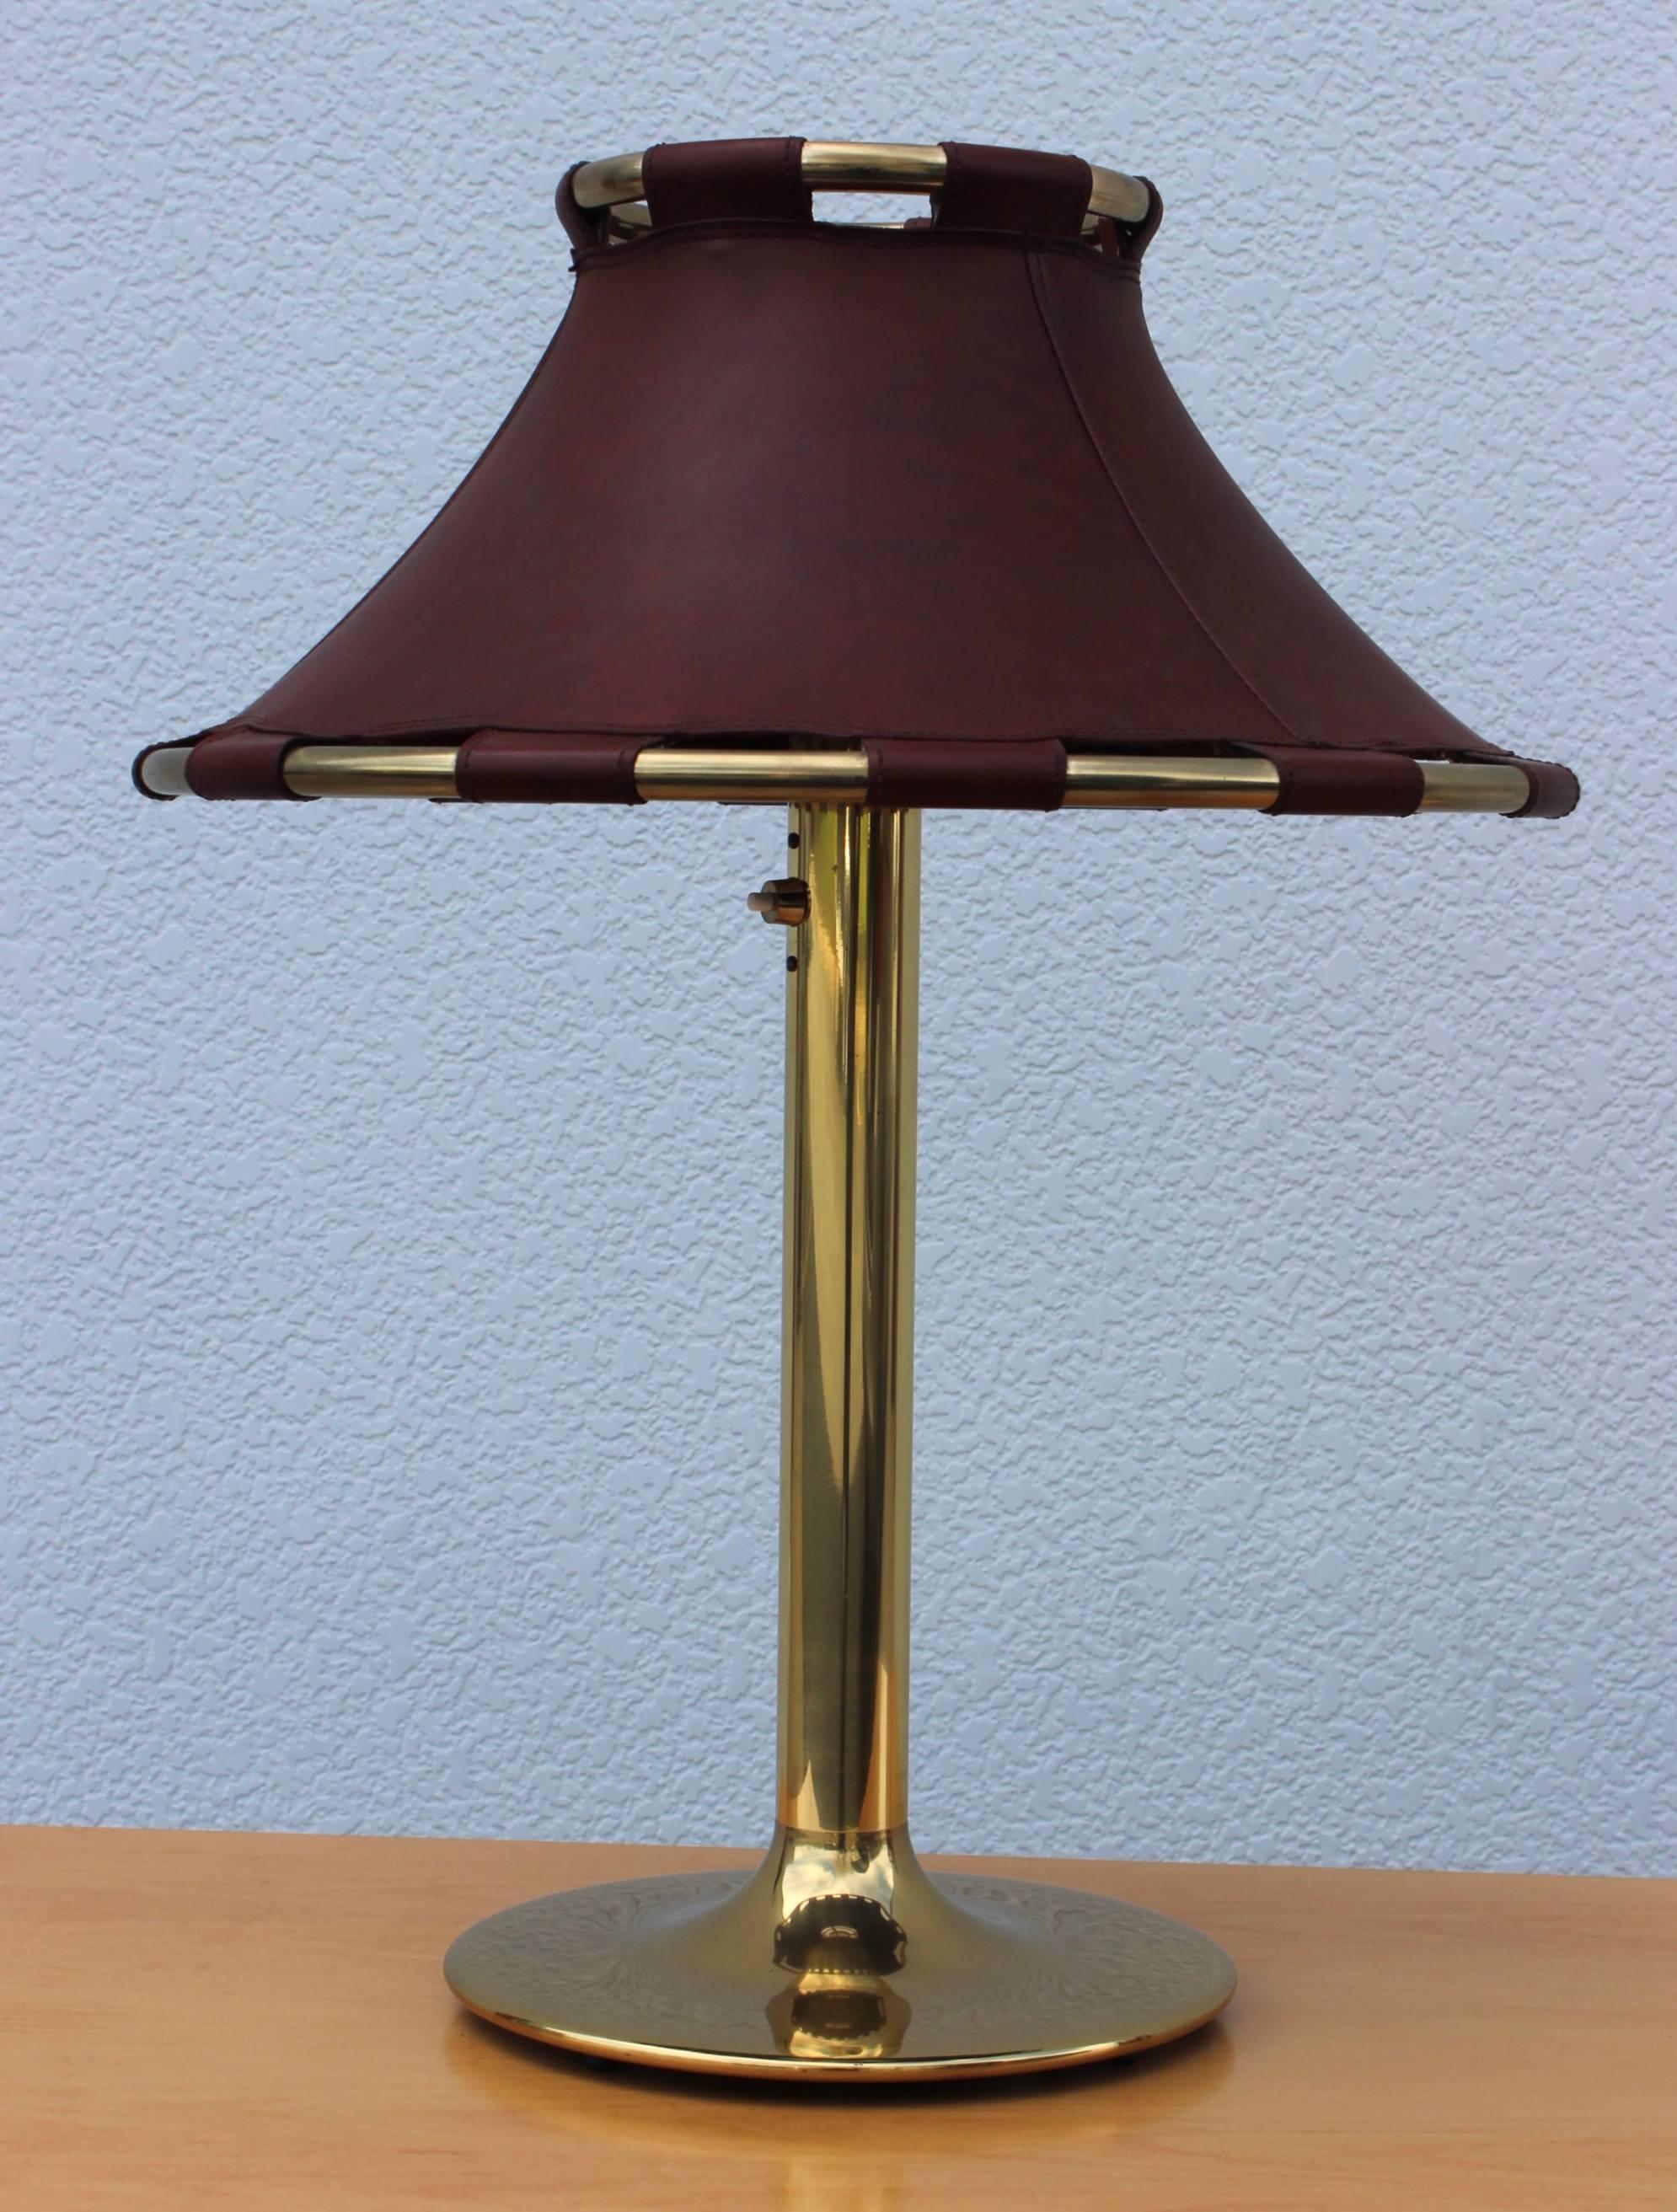 Stunning 1970s brass with leather shade table lamp designed by Anna Pendant for Ateljé Lyktan.